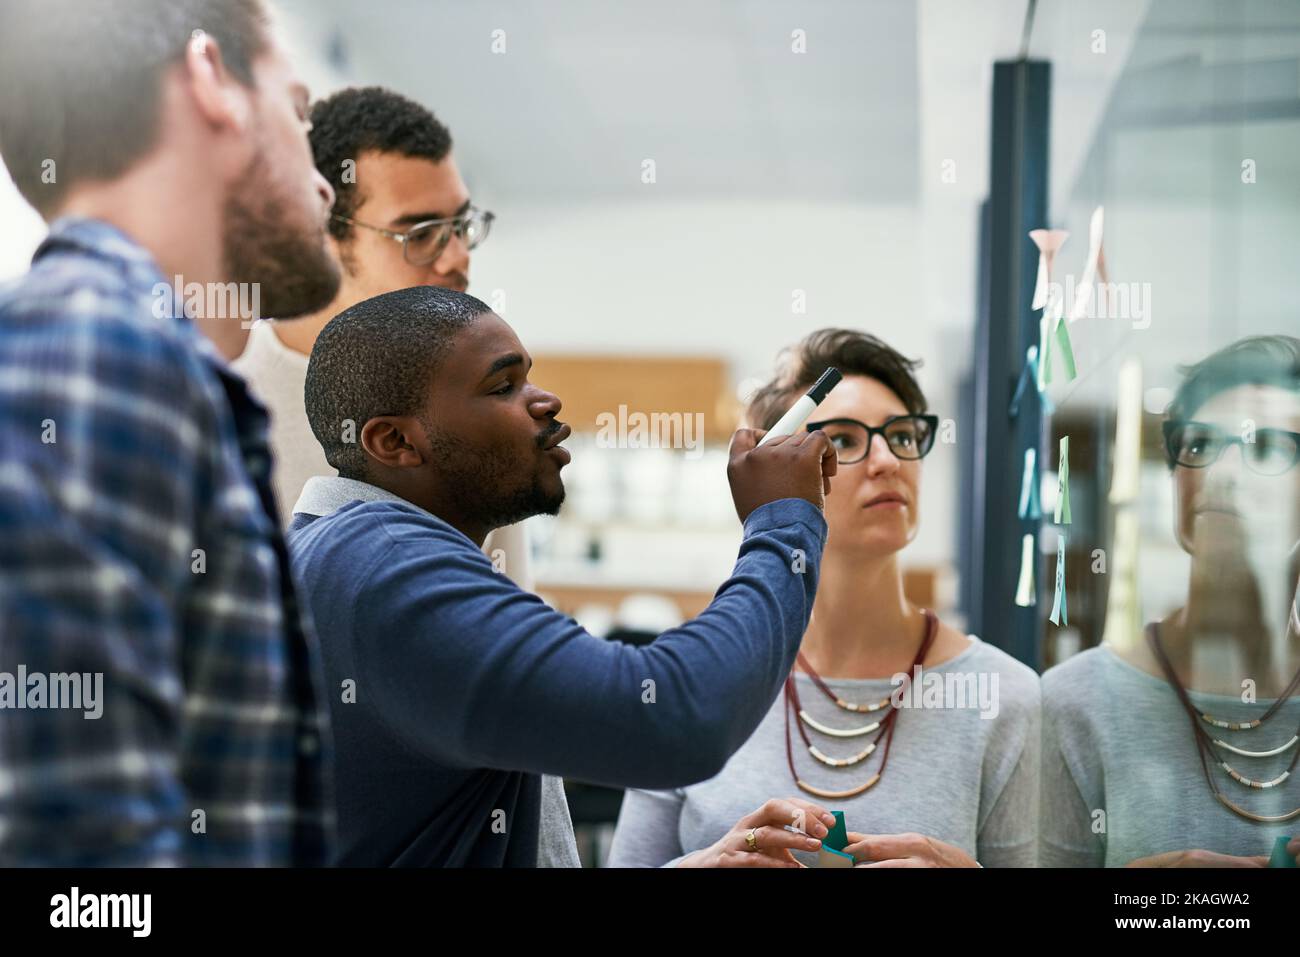 Putting big plans into place then action. a group of designers brainstorming with notes on a glass wall in an office. Stock Photo